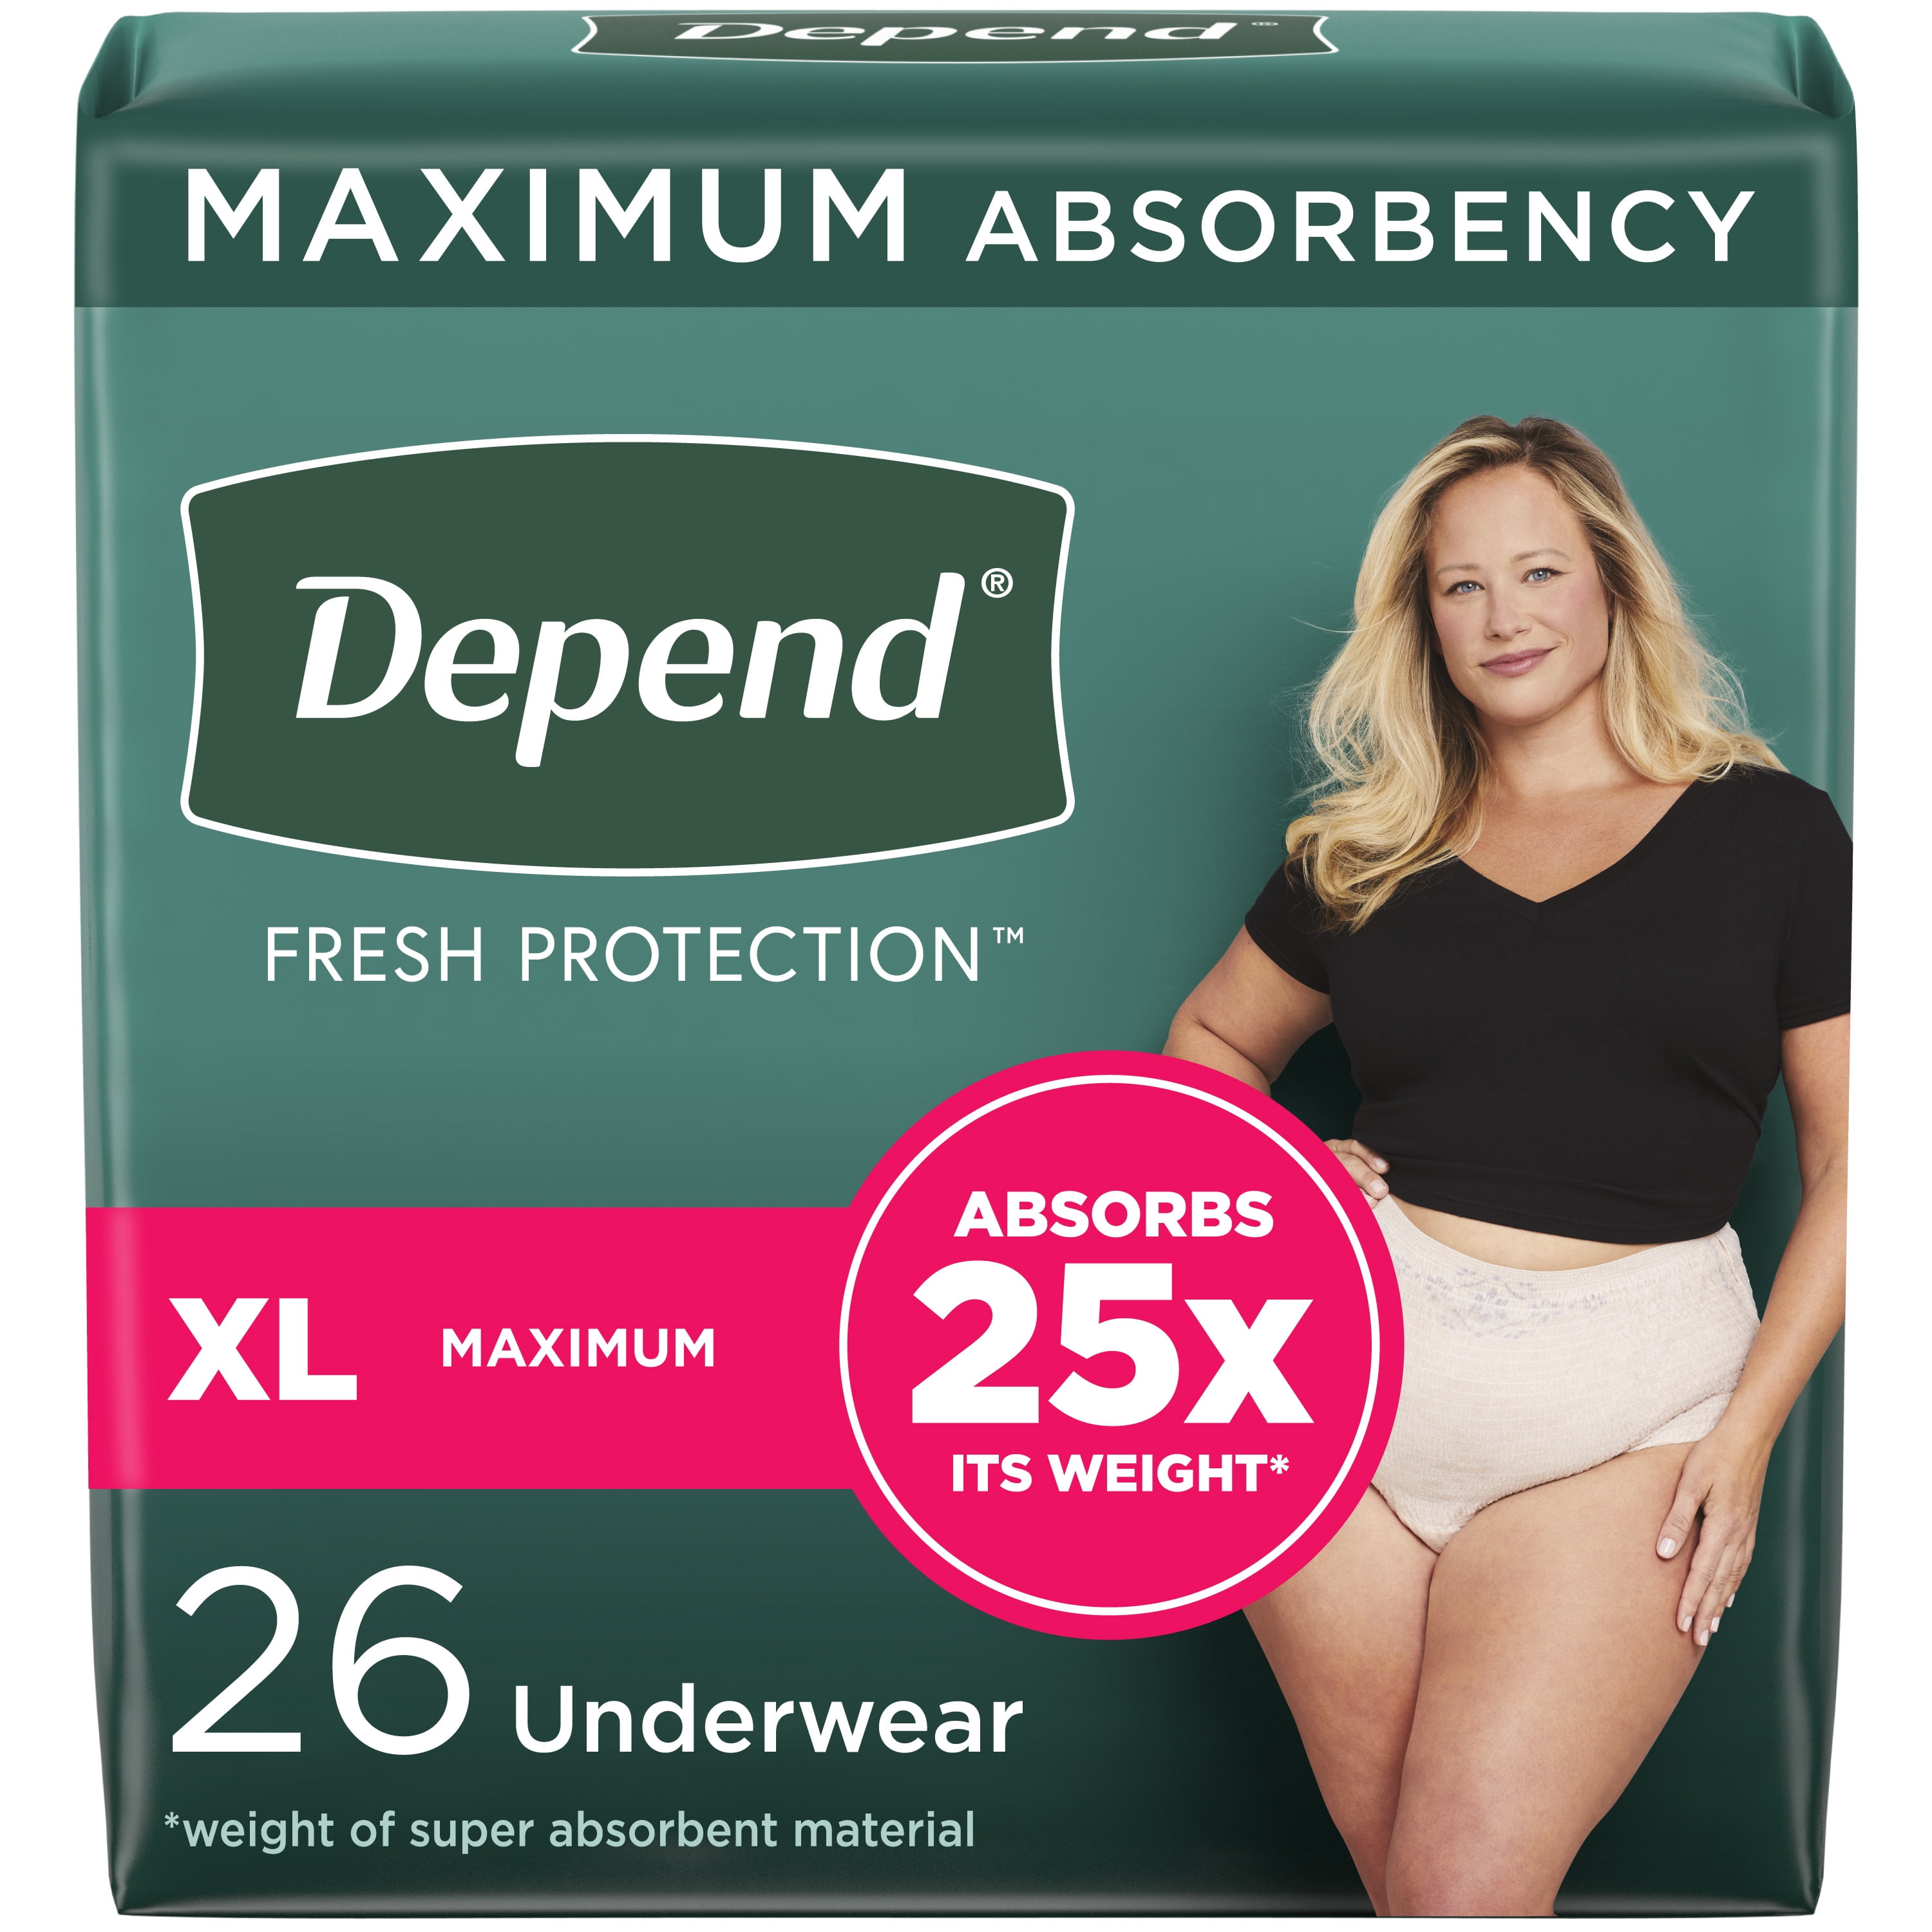 Depend Night Defense Overnight Incontinence Underwear for Men S/M, Large,  XL ✓